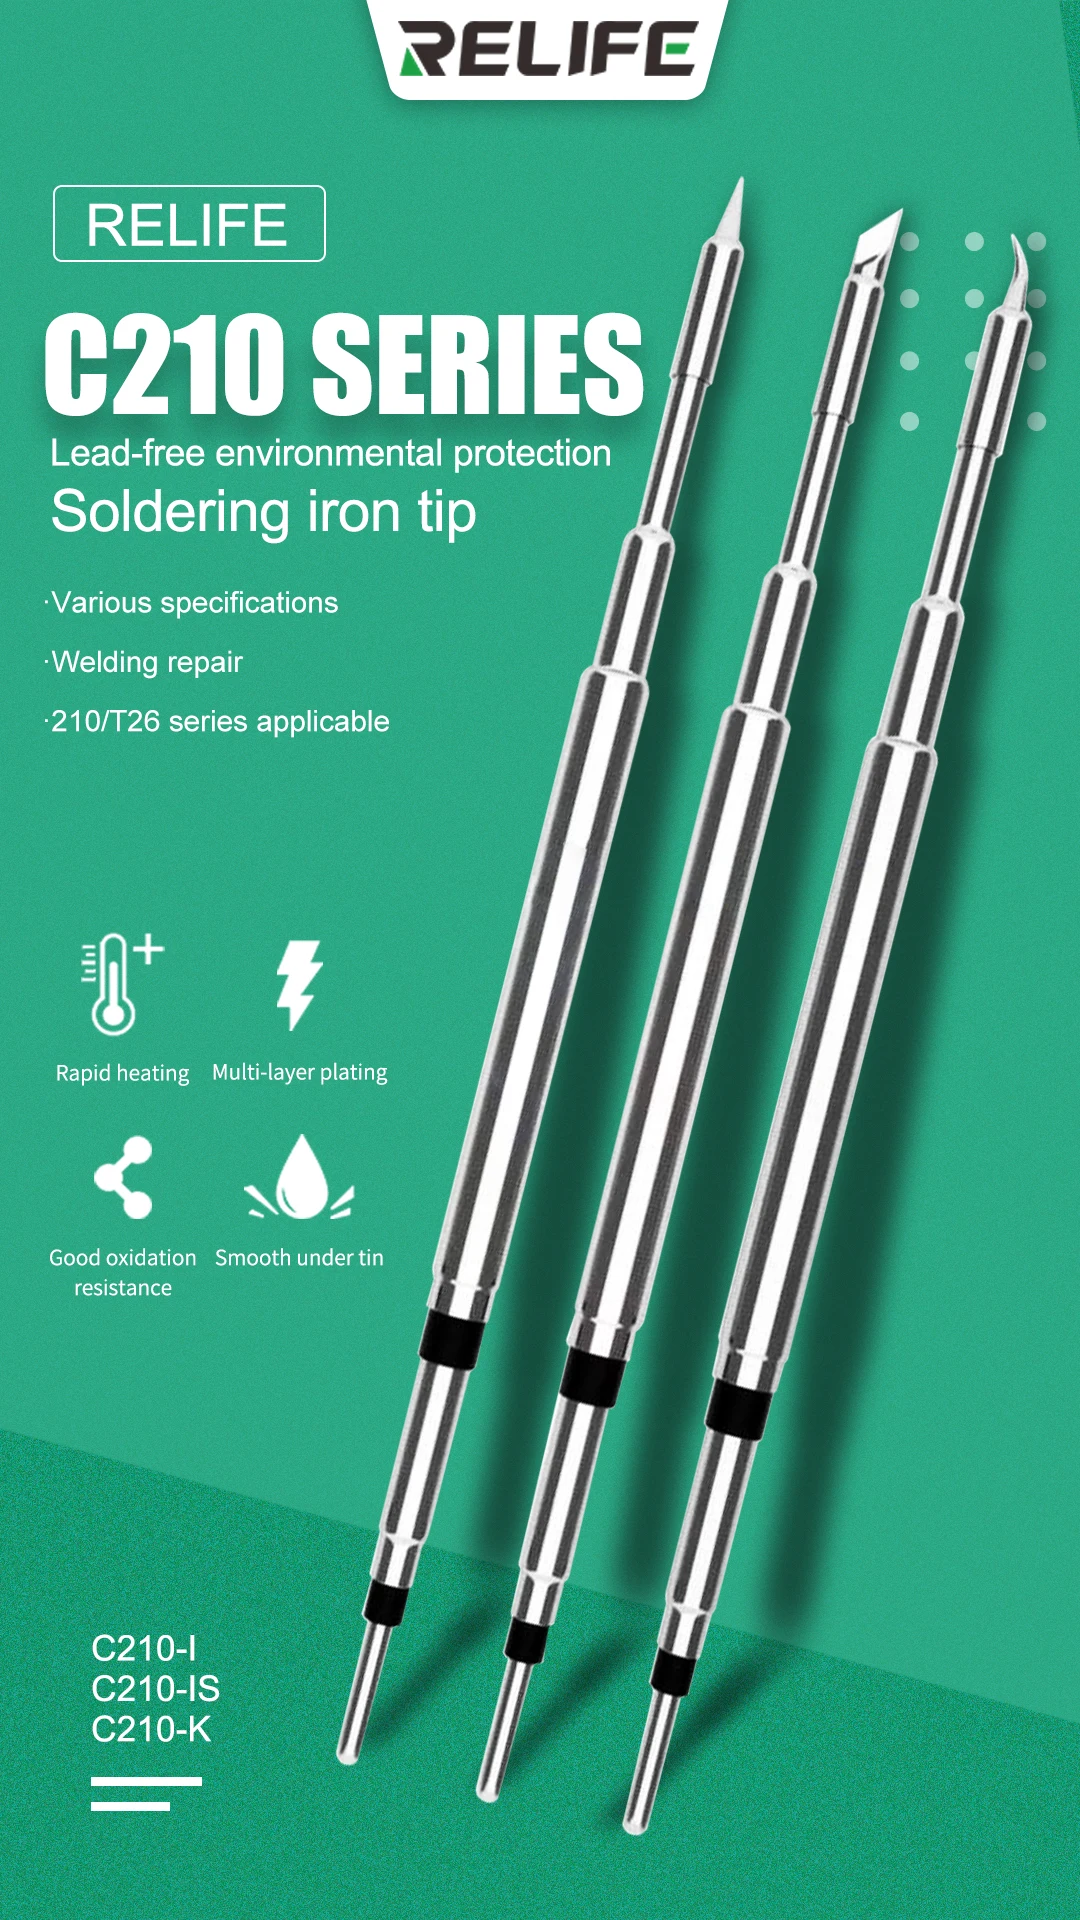 ELIFE RL-C210 Series solodering tip 1.Suitable for C210/T26